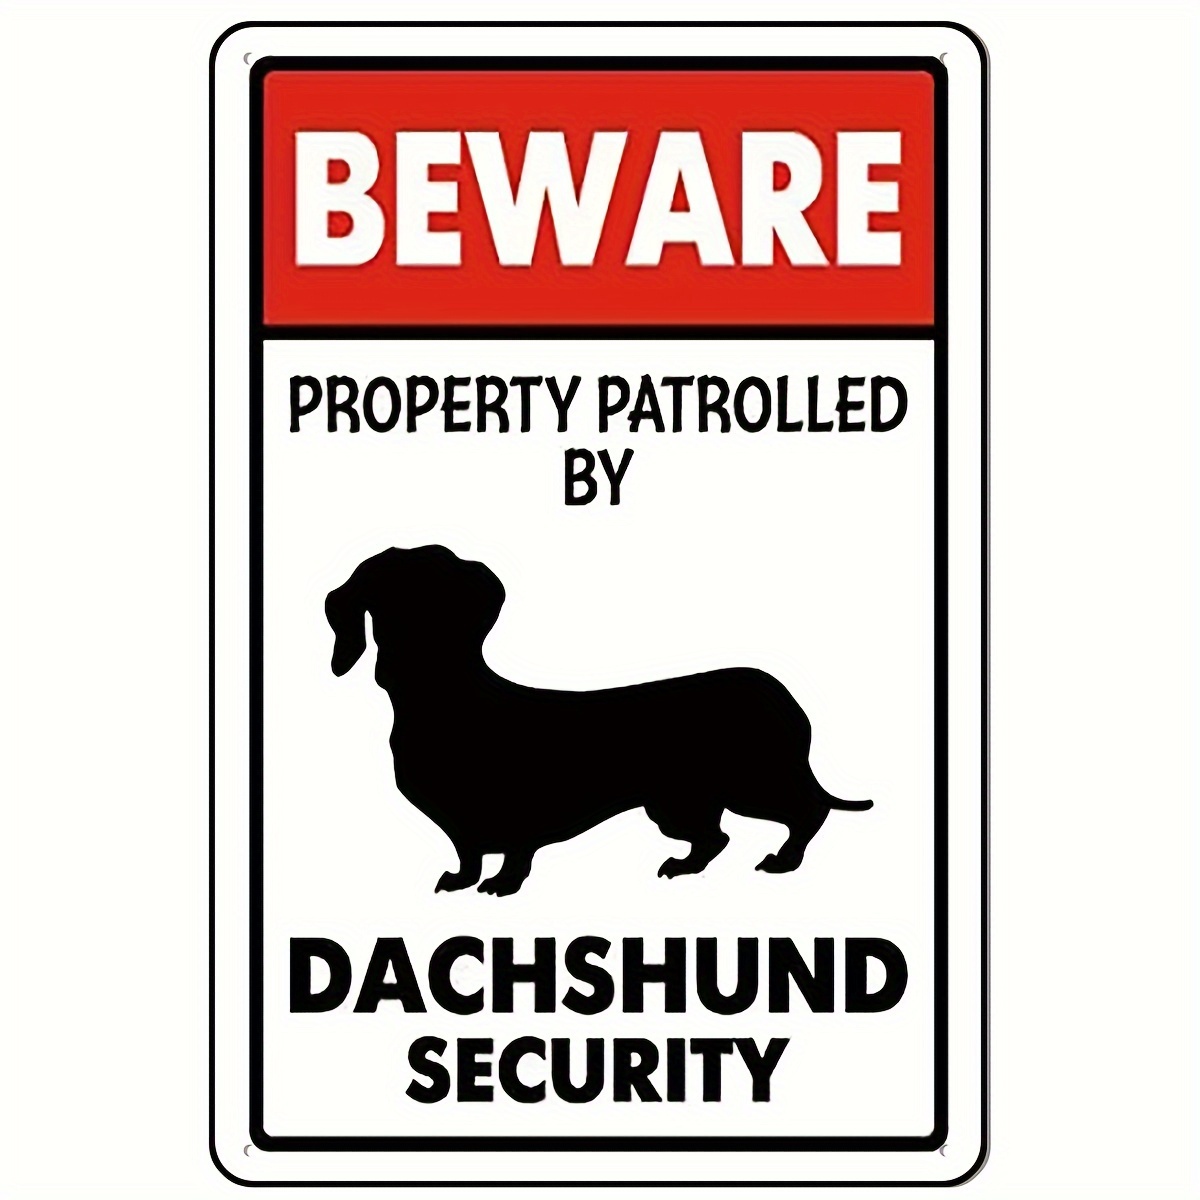 

1pc Metal Signs Beware Property Patrolled By Dachshund Security Signs Traffic Sign Aluminum Signs Road Tin Signs For Outdoor Coffee Shop Bar Club 8x12 Inches